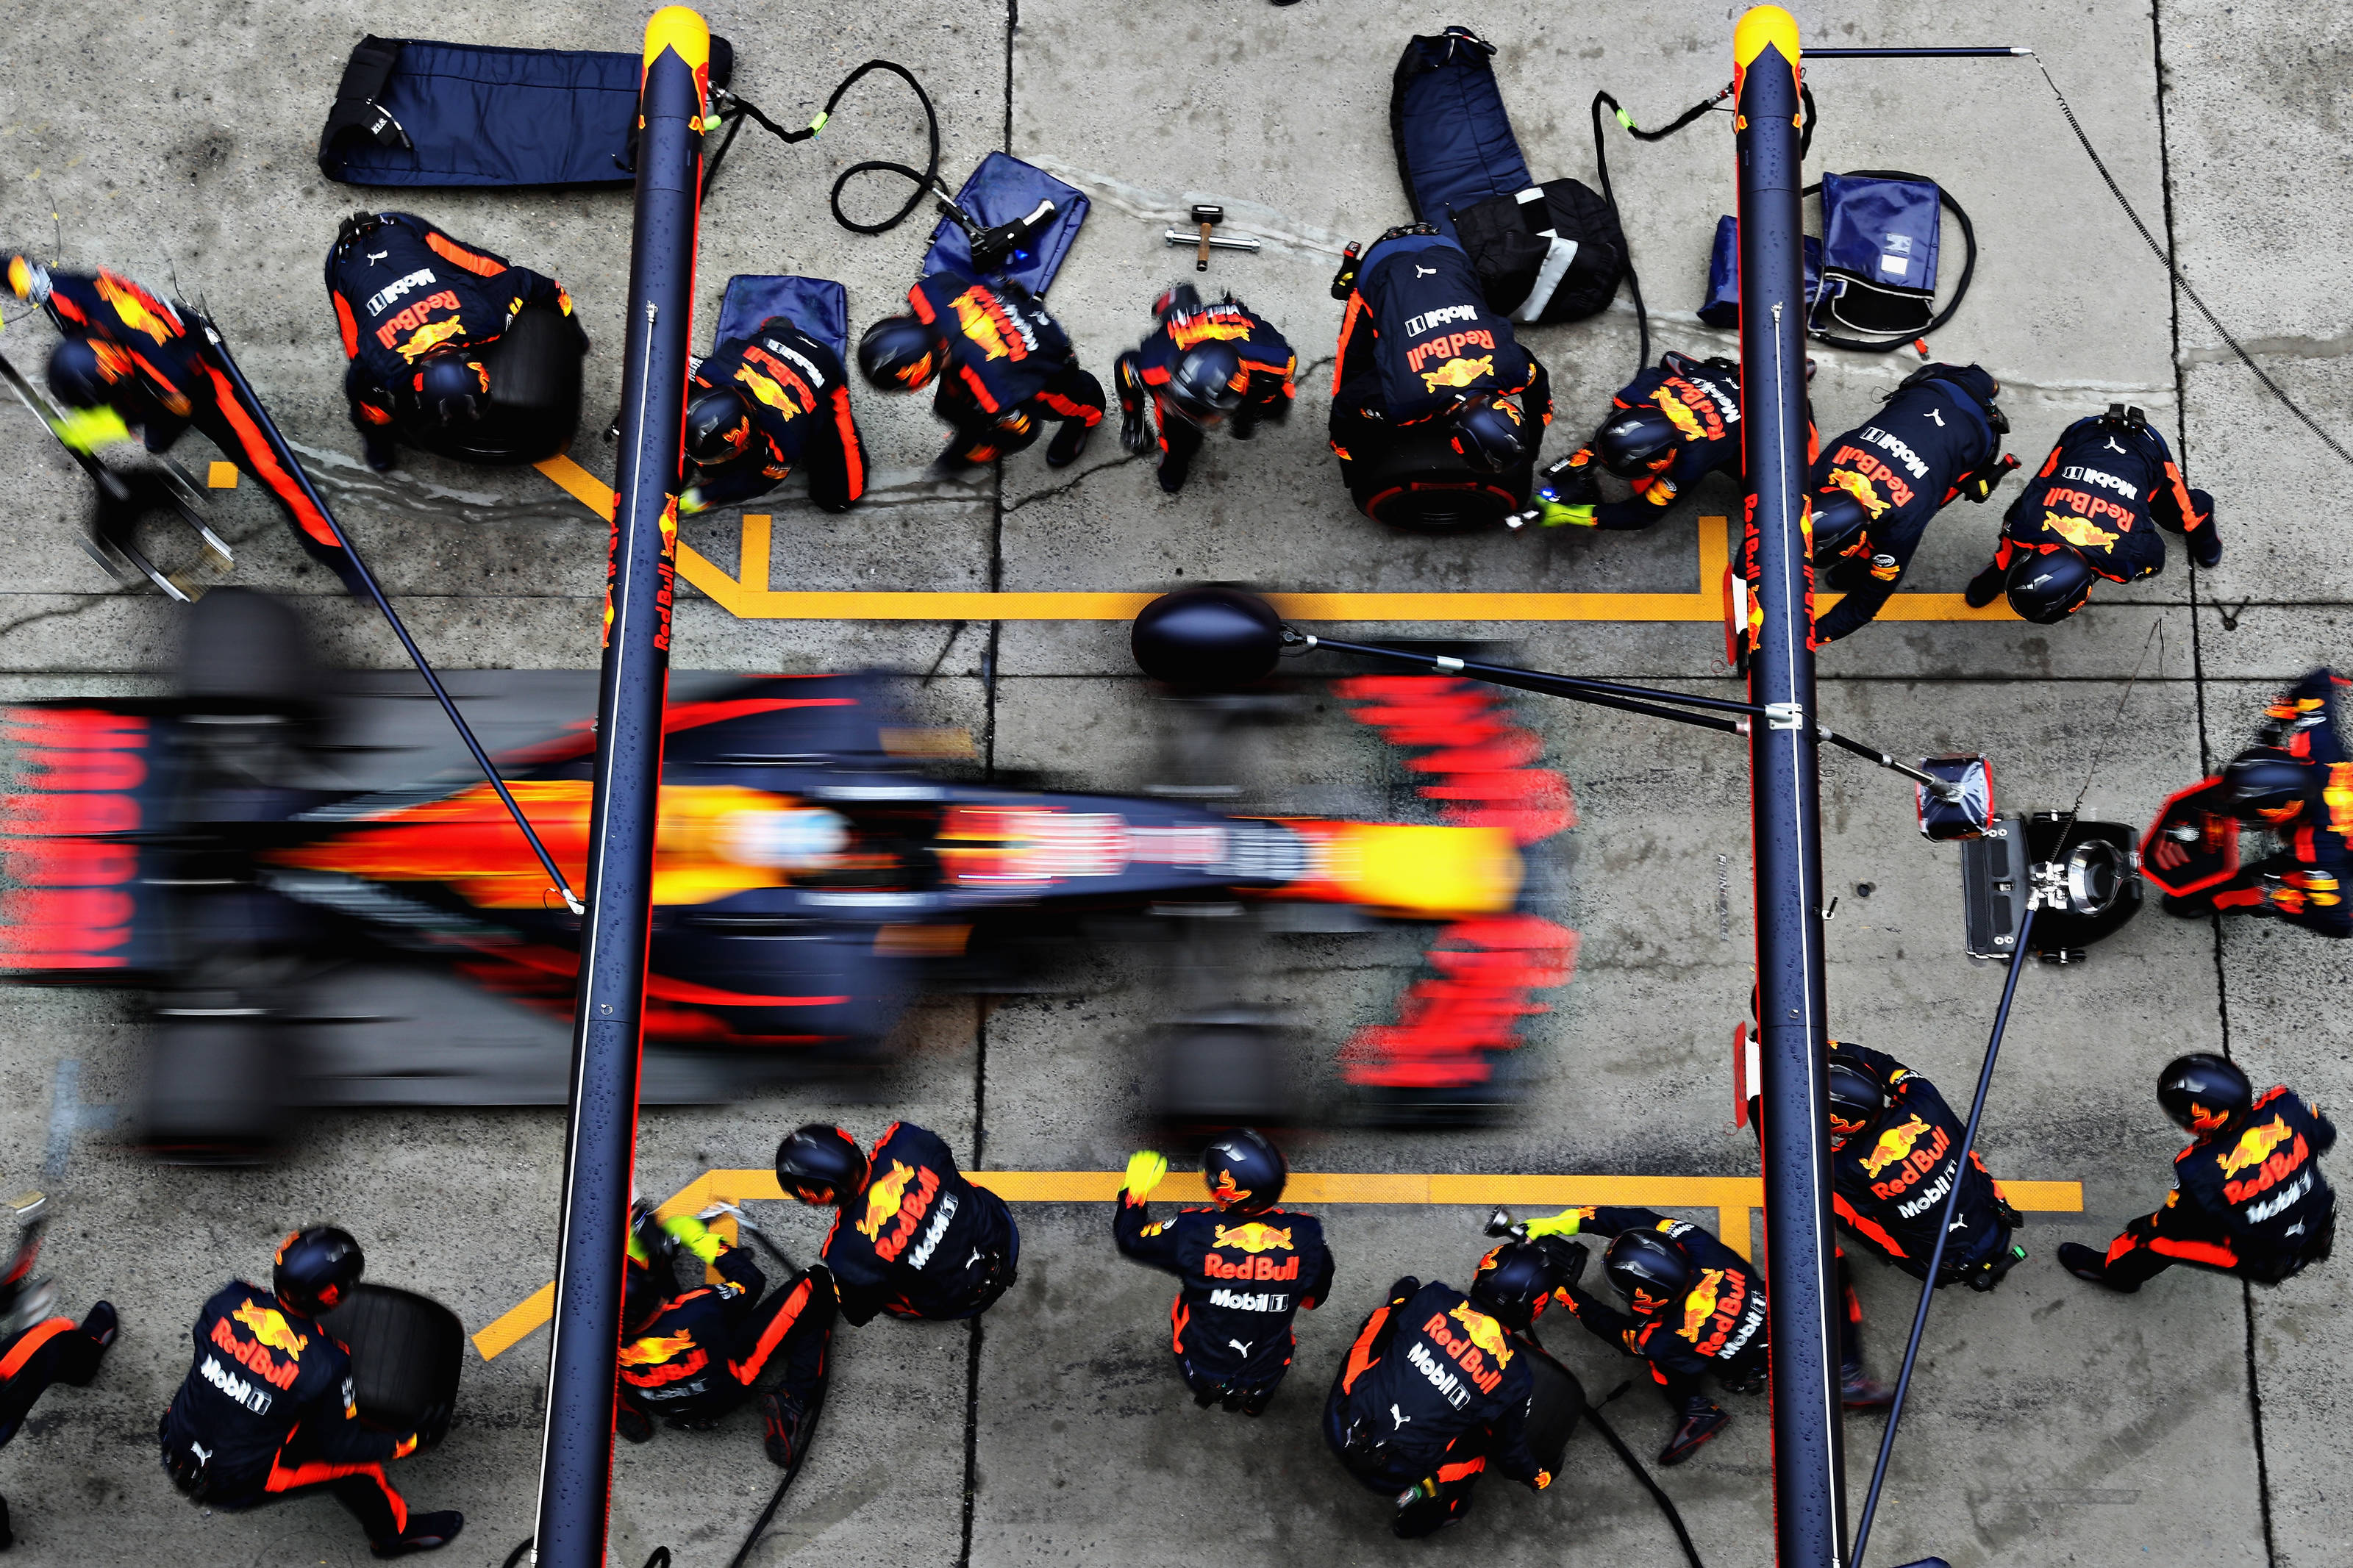 red bull pitstop tour